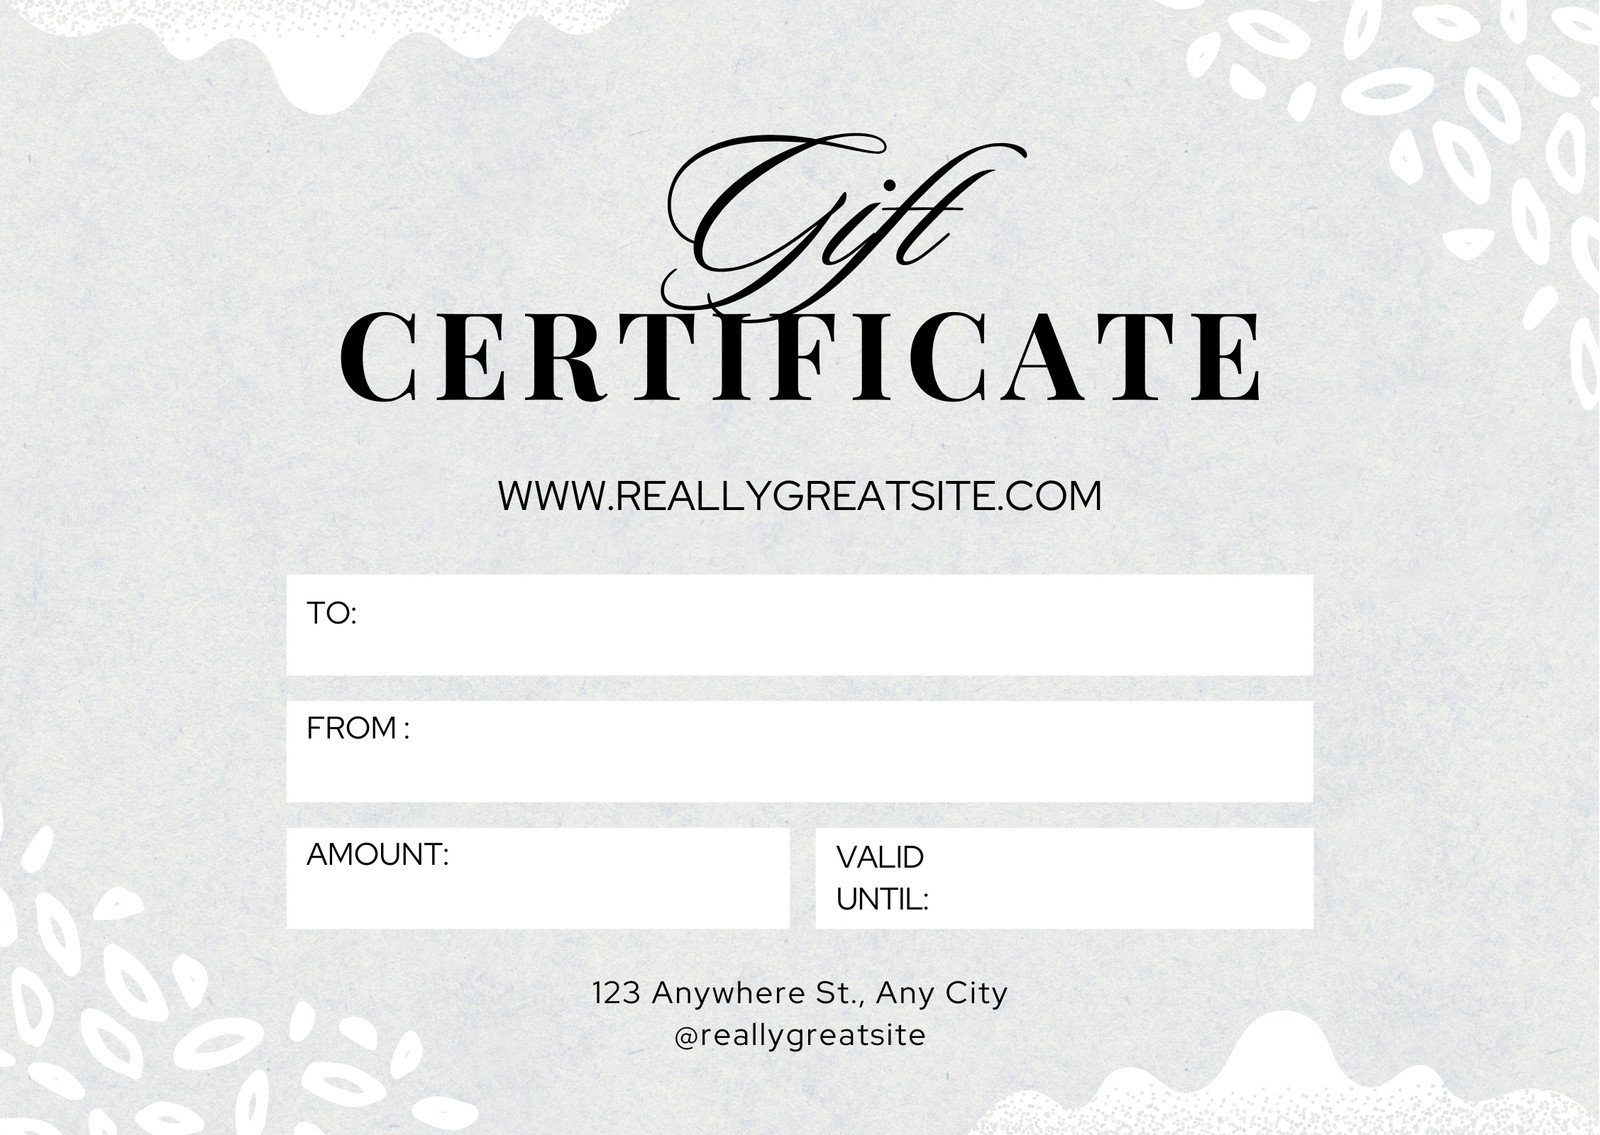 blank gift certificate templates